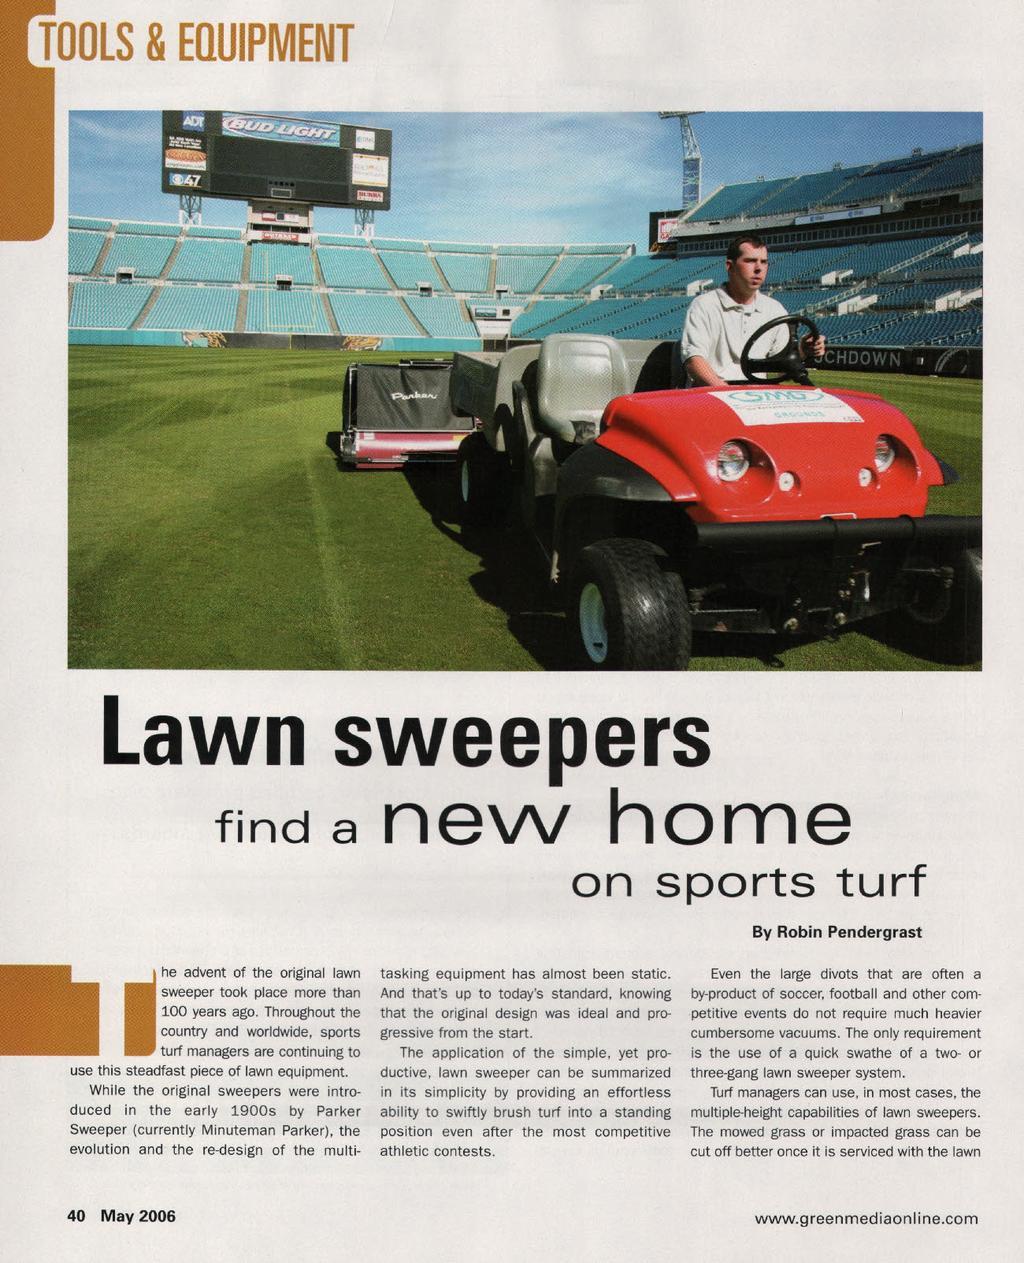 TOOLS & EUUIPMENT Lawn sweepers find a nevv home on sports turf By Robin Pendergrast Ihe advent of the original lawn sweeper took place more than 100 years ago.